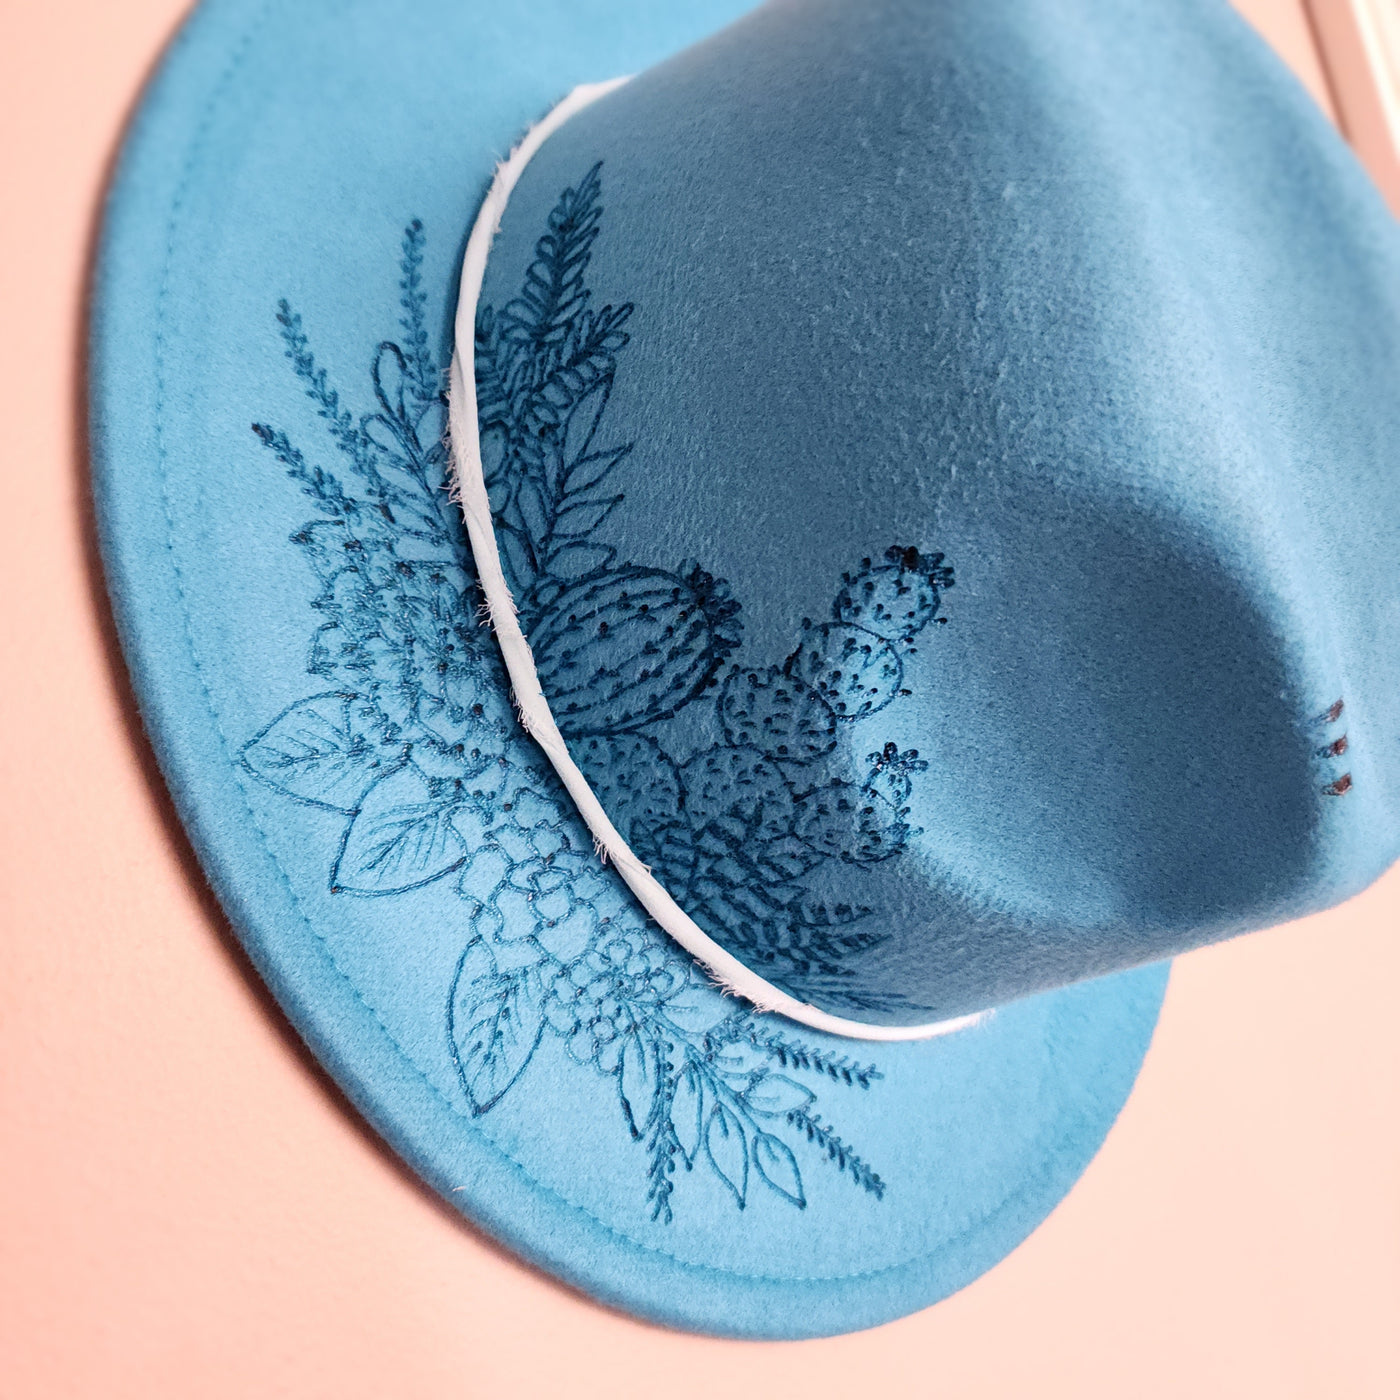 Cactus Floral + Fabric Band + Feather || Blue Turquoisr Felt Fedora Small Brim Hat || Freehand Burned